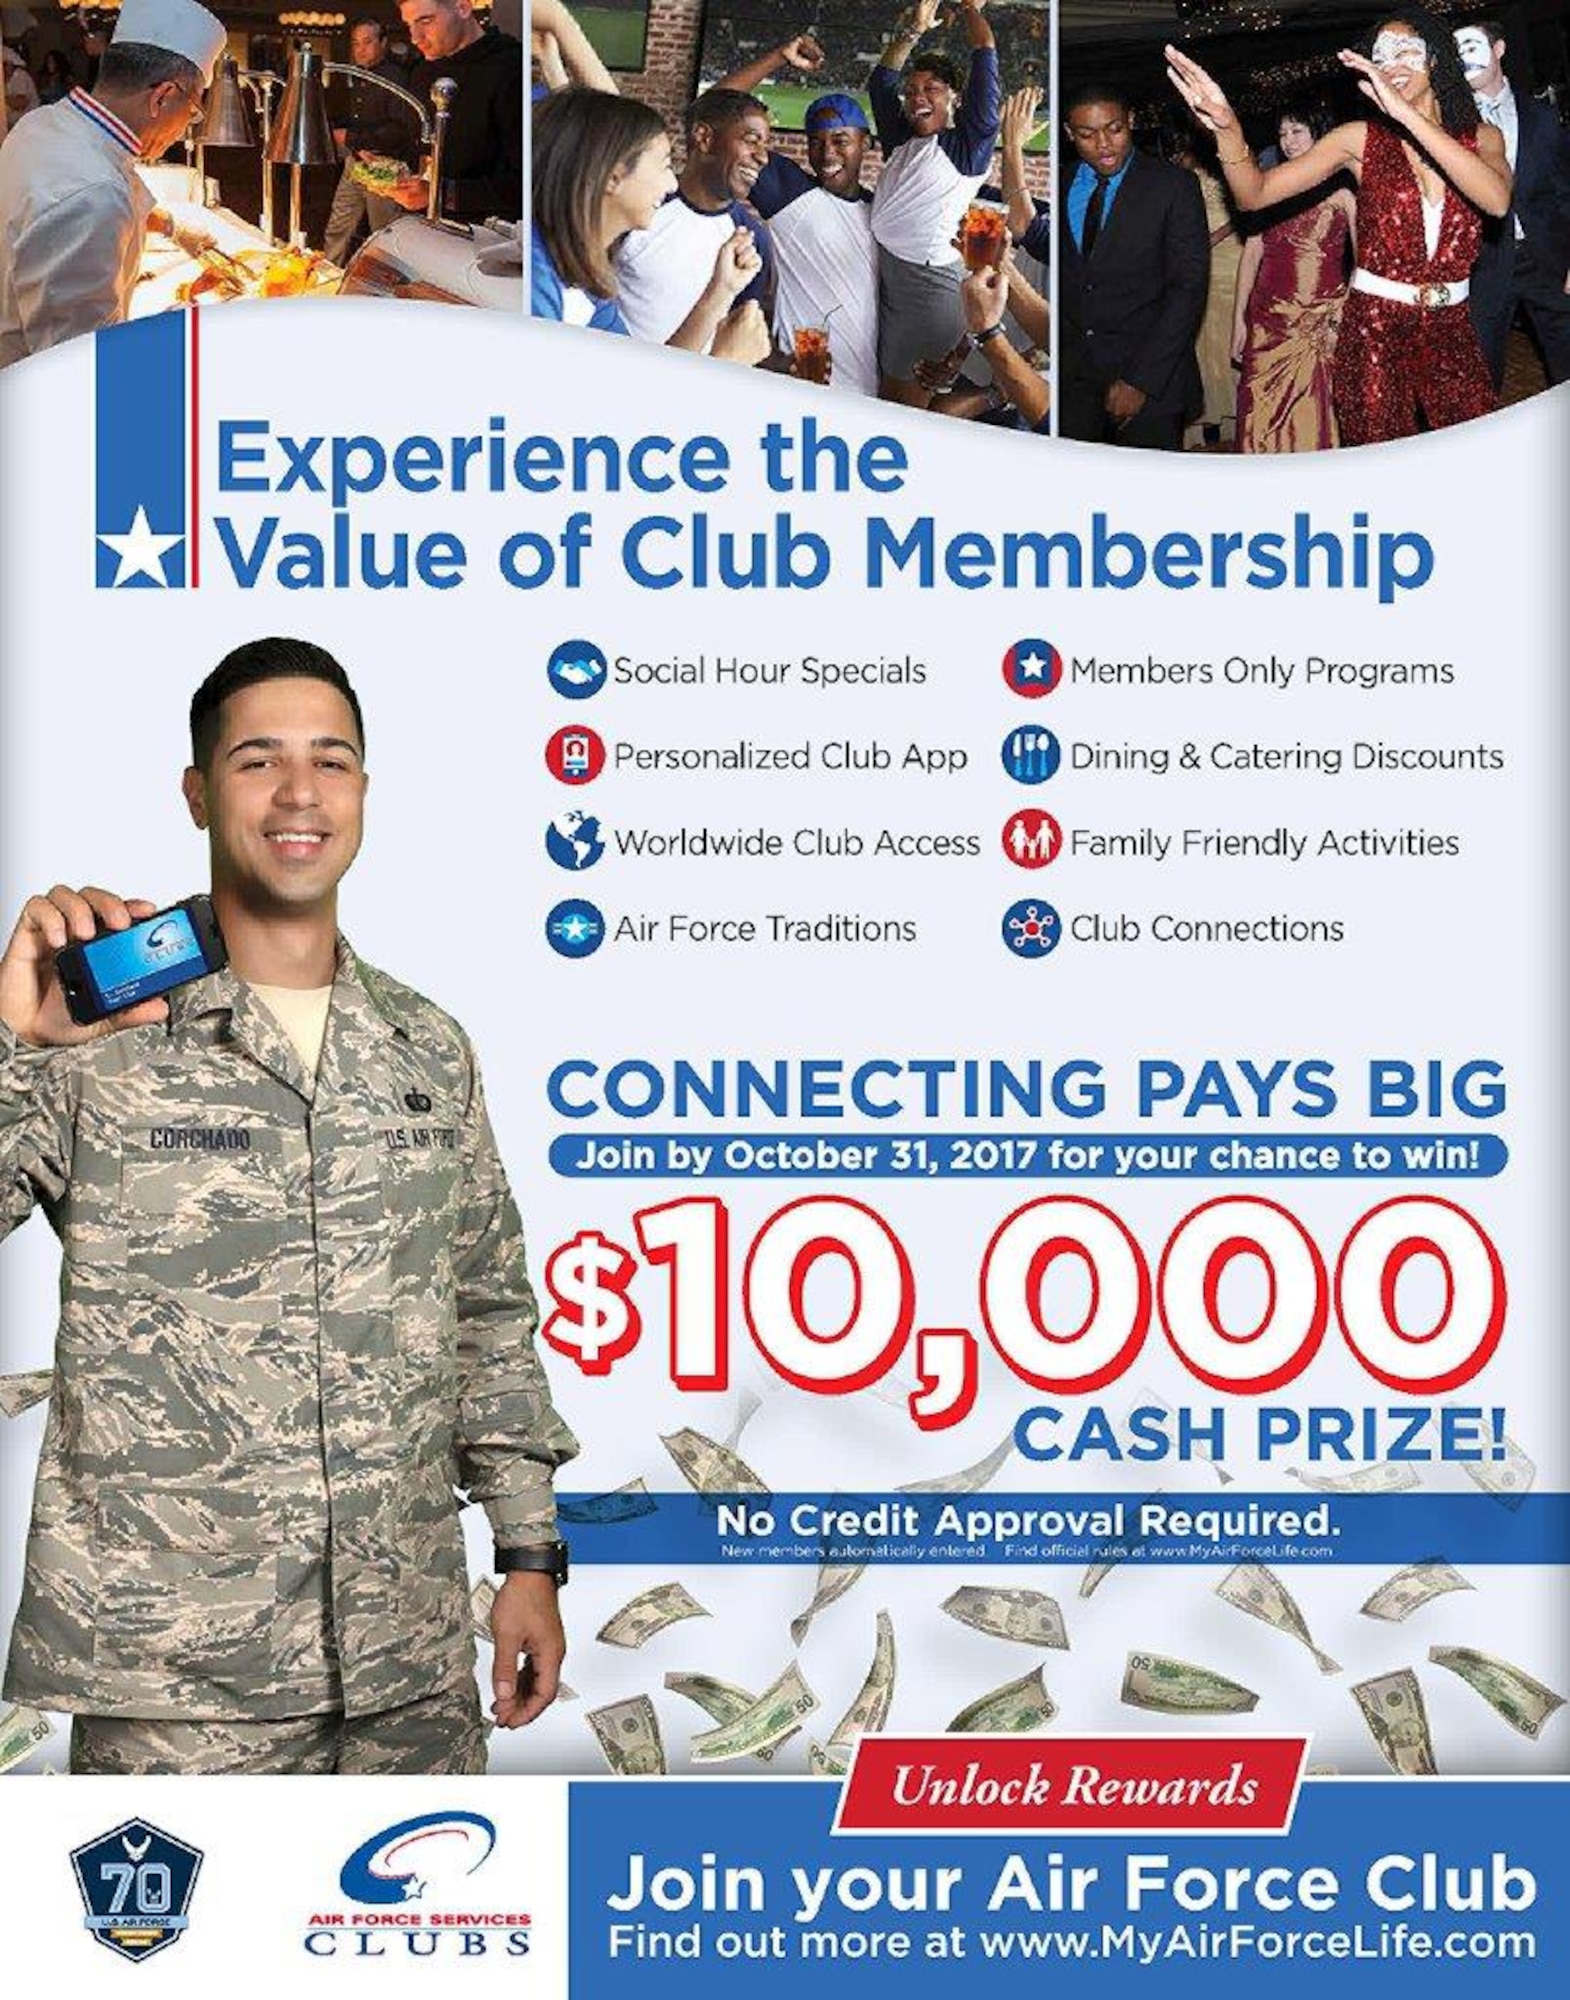 The Air Force Services Activity's new member drive ends Oct. 31, 2017. Those who join by then are eligible to win a $10,000 grand prize. (U.S. Air Force graphic by the Air Force Services Activity)